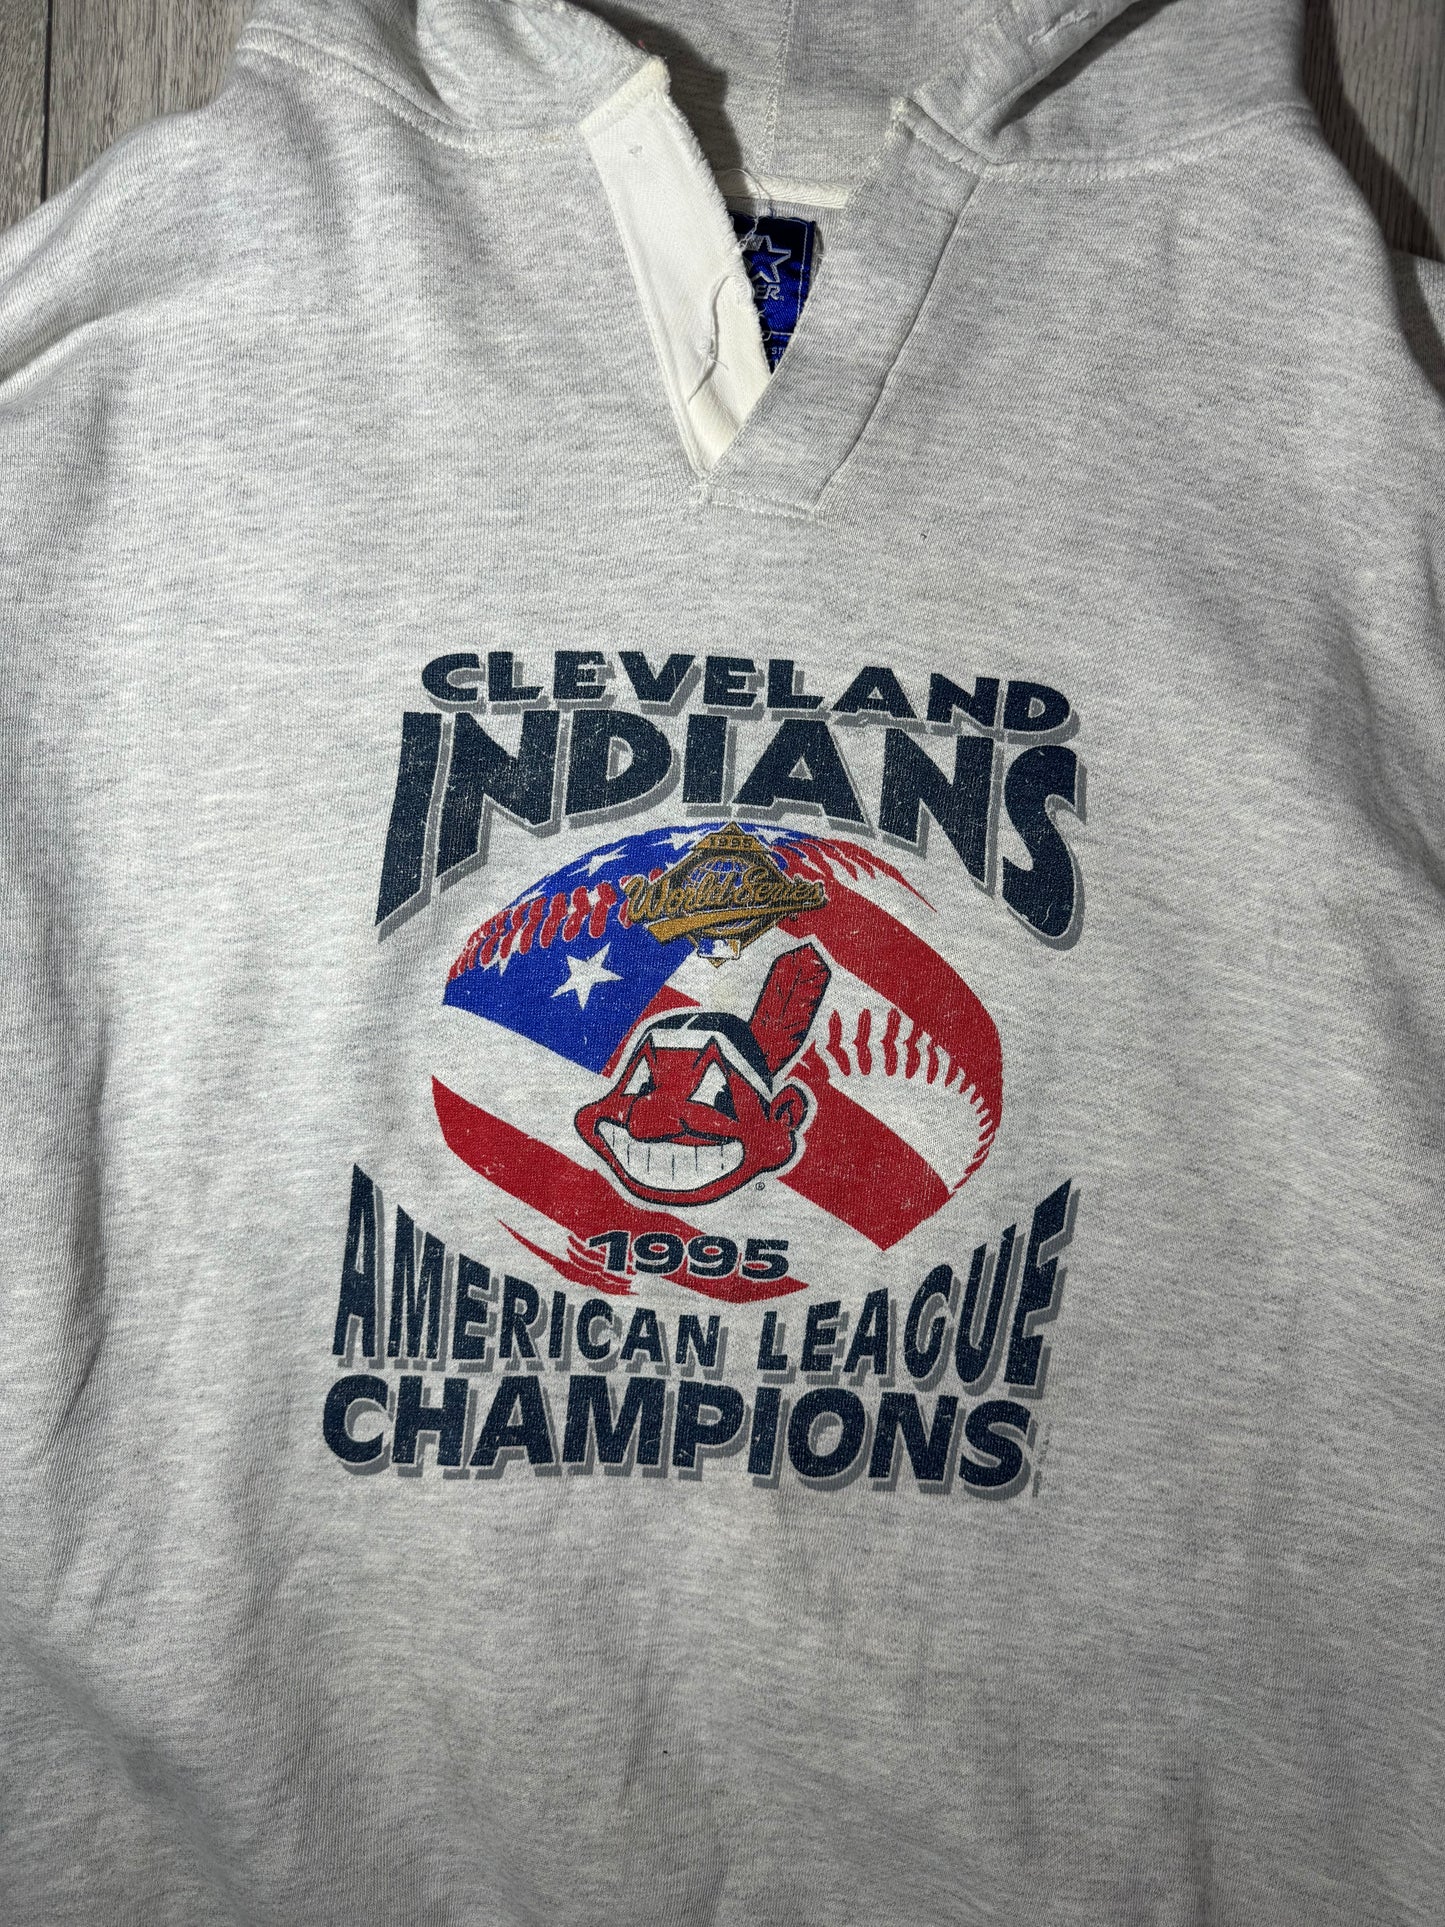 Vintage 1995 Cleveland Indians American League Champions Hoodie